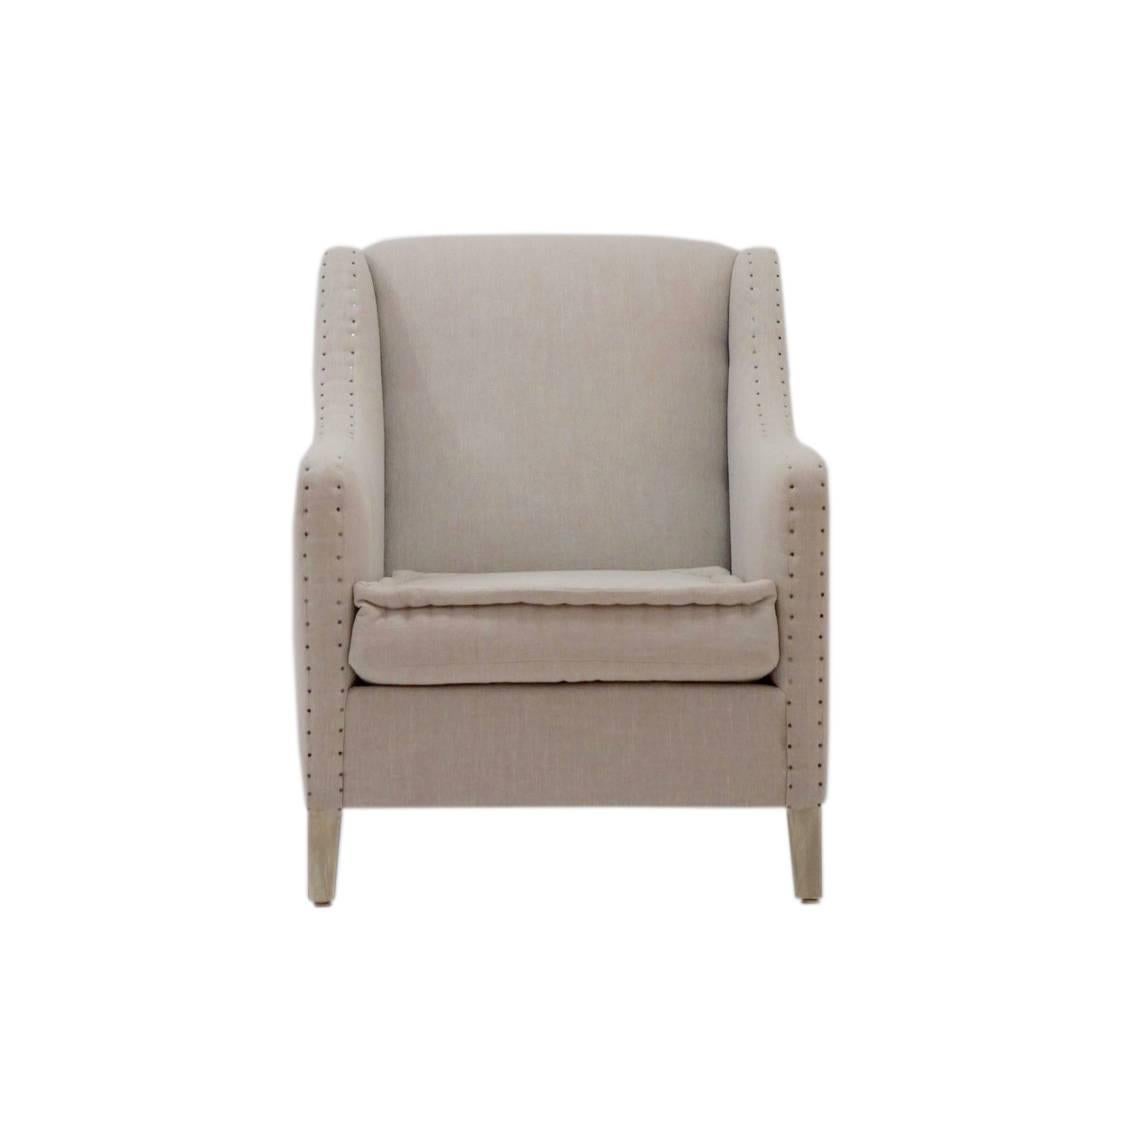 The Aspetuck club chair features exposed nailheads, the 